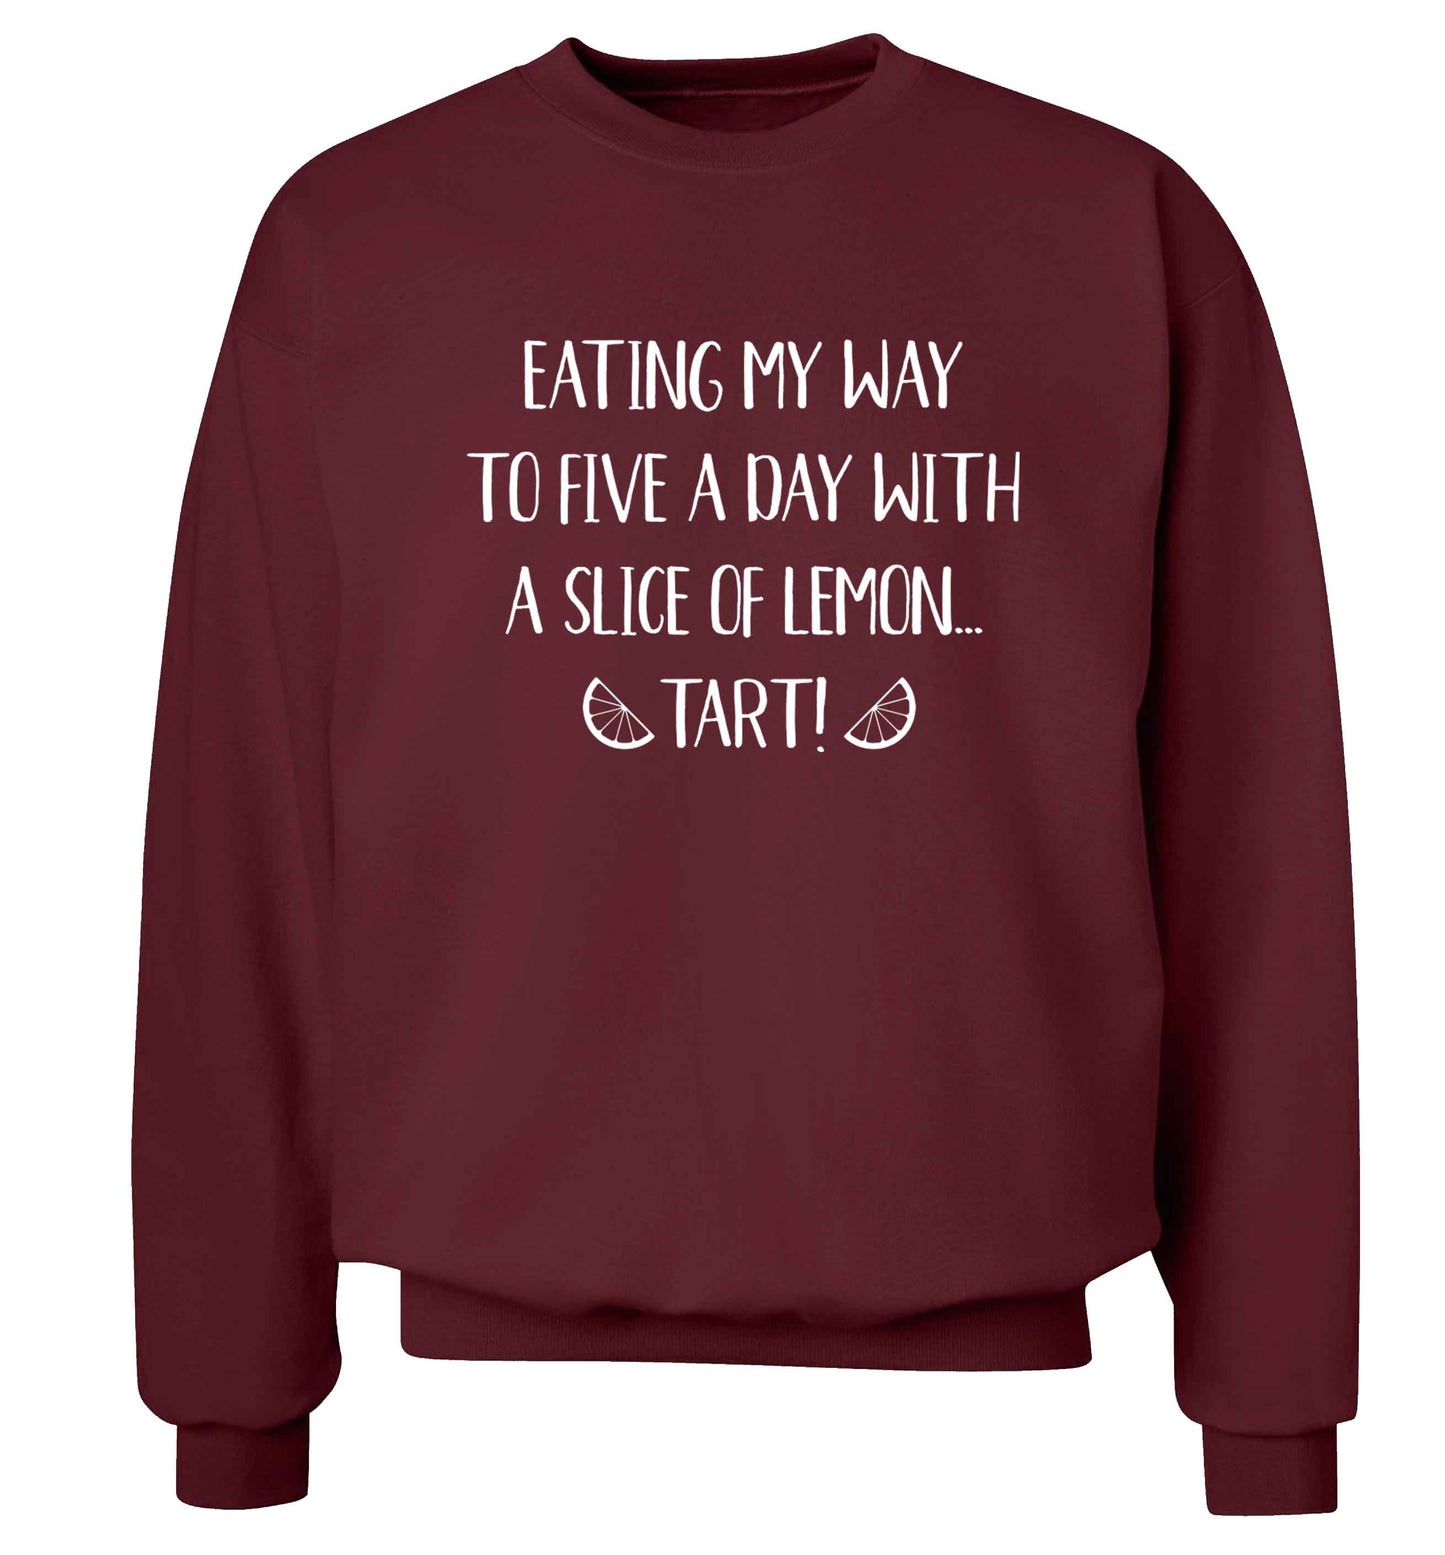 Eating my way to five a day with a slice of lemon tart Adult's unisex maroon Sweater 2XL